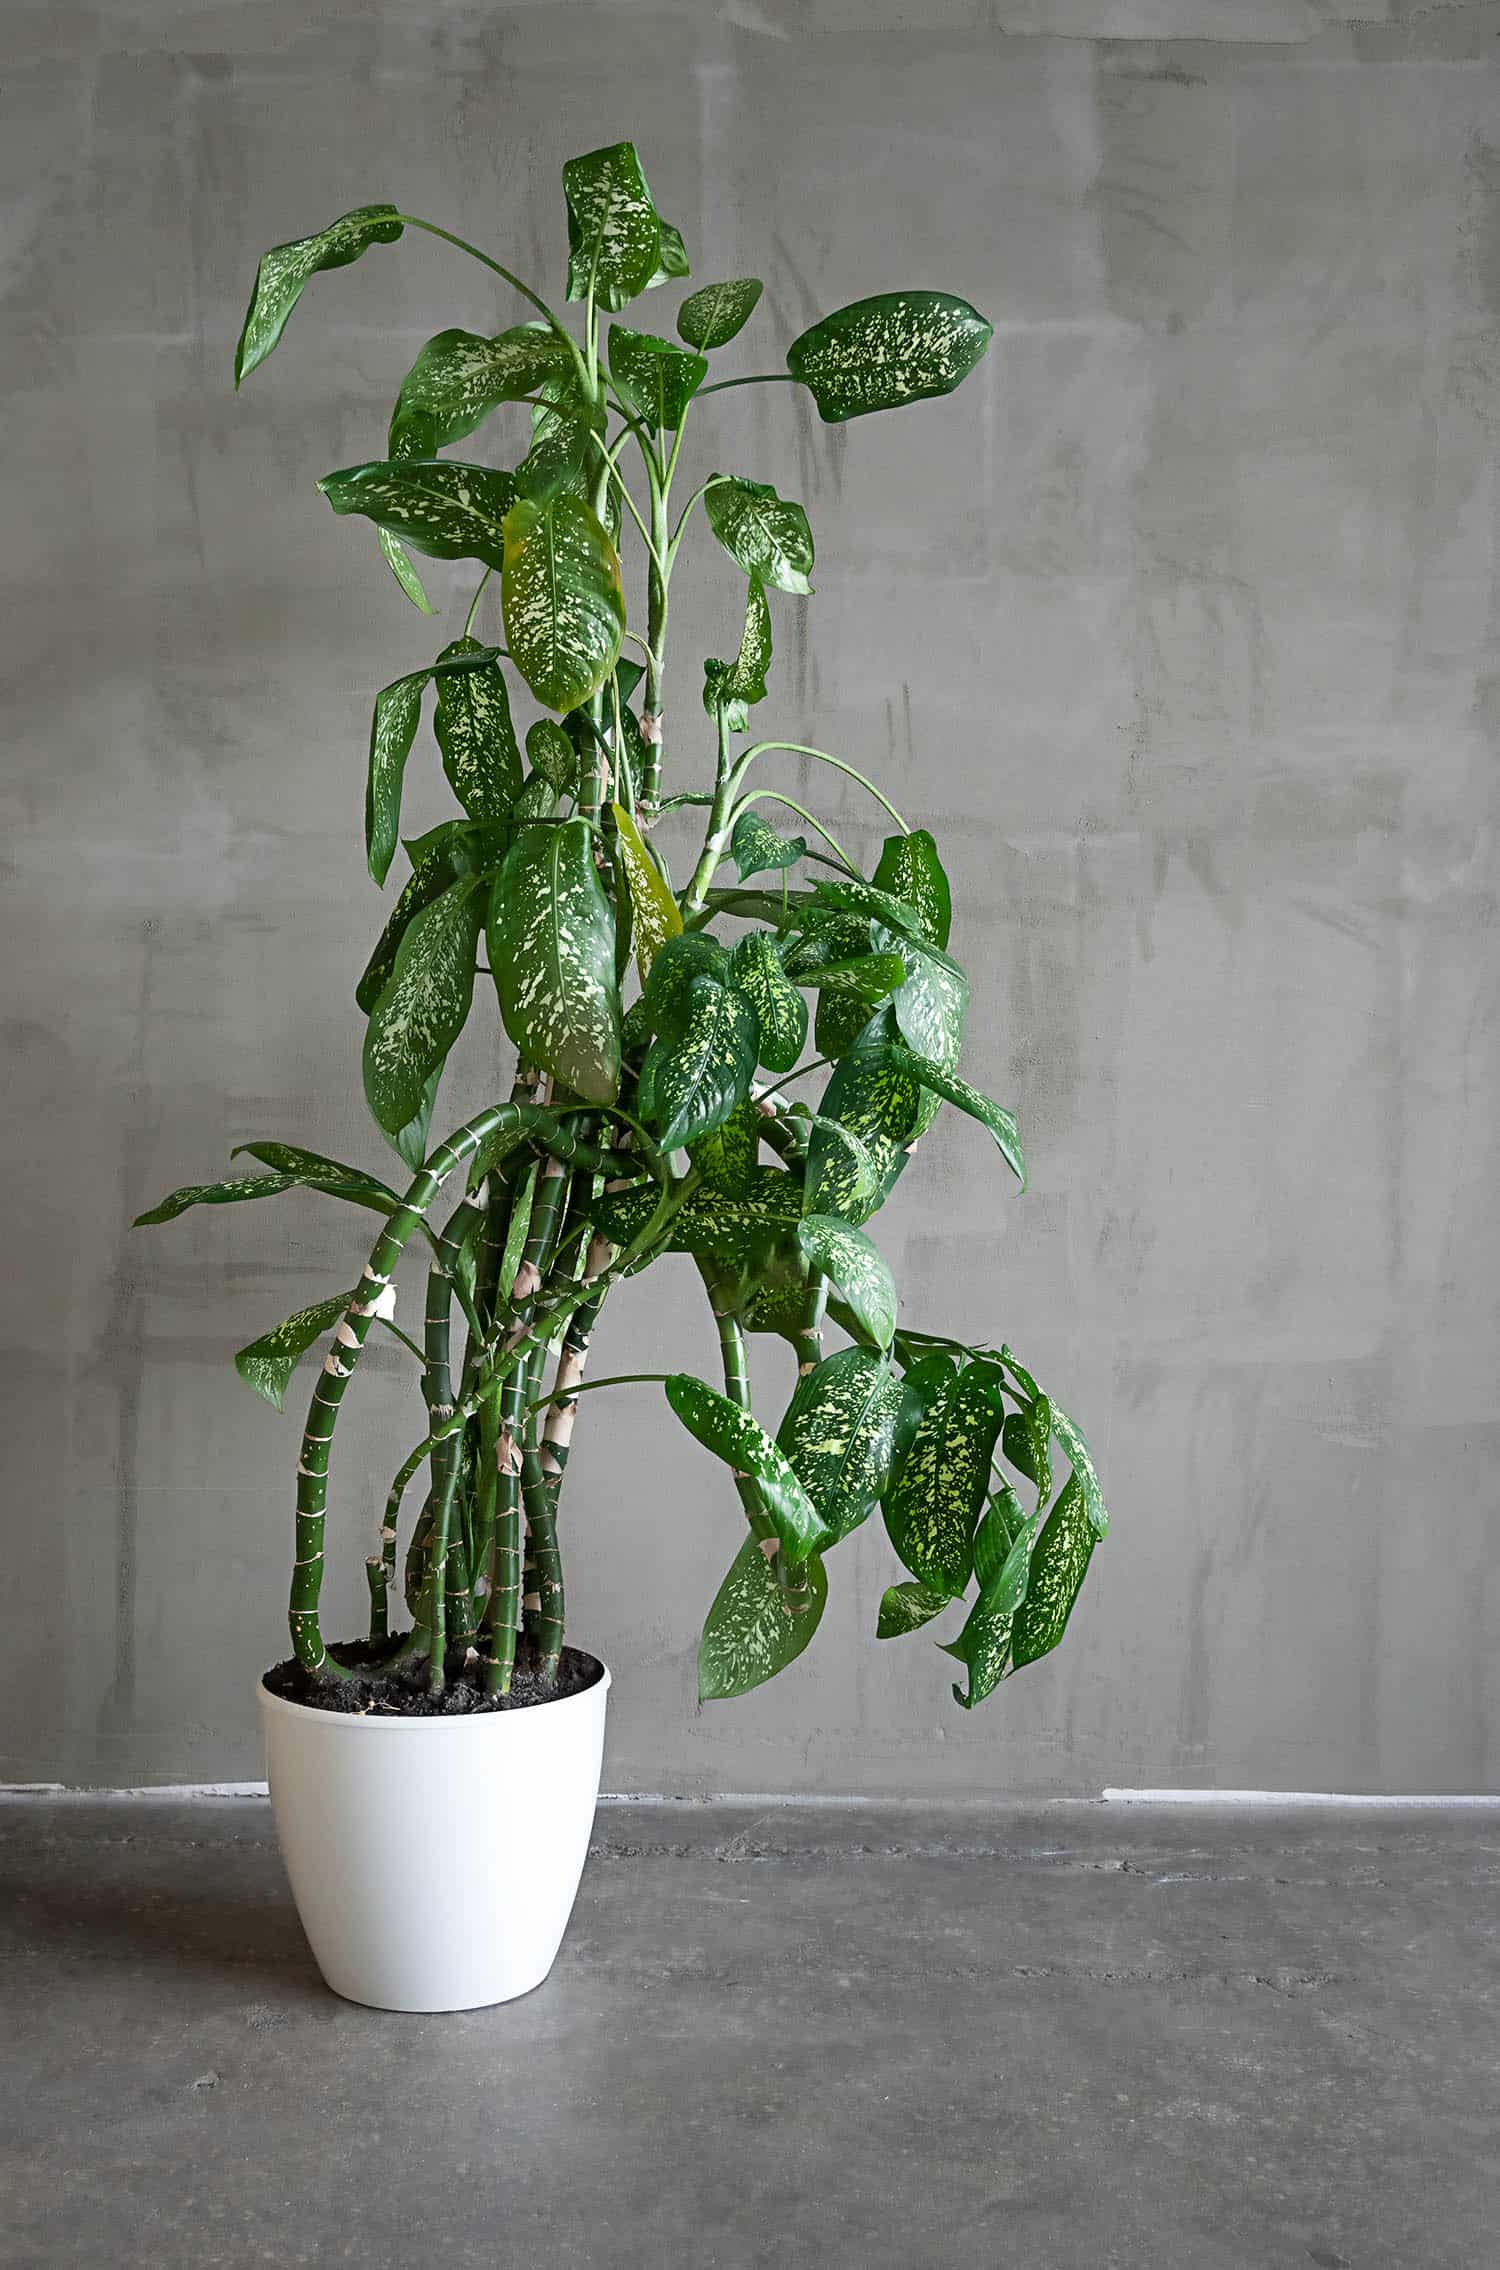 4 reasons to prune your dumb cane plus how & when to do it - the